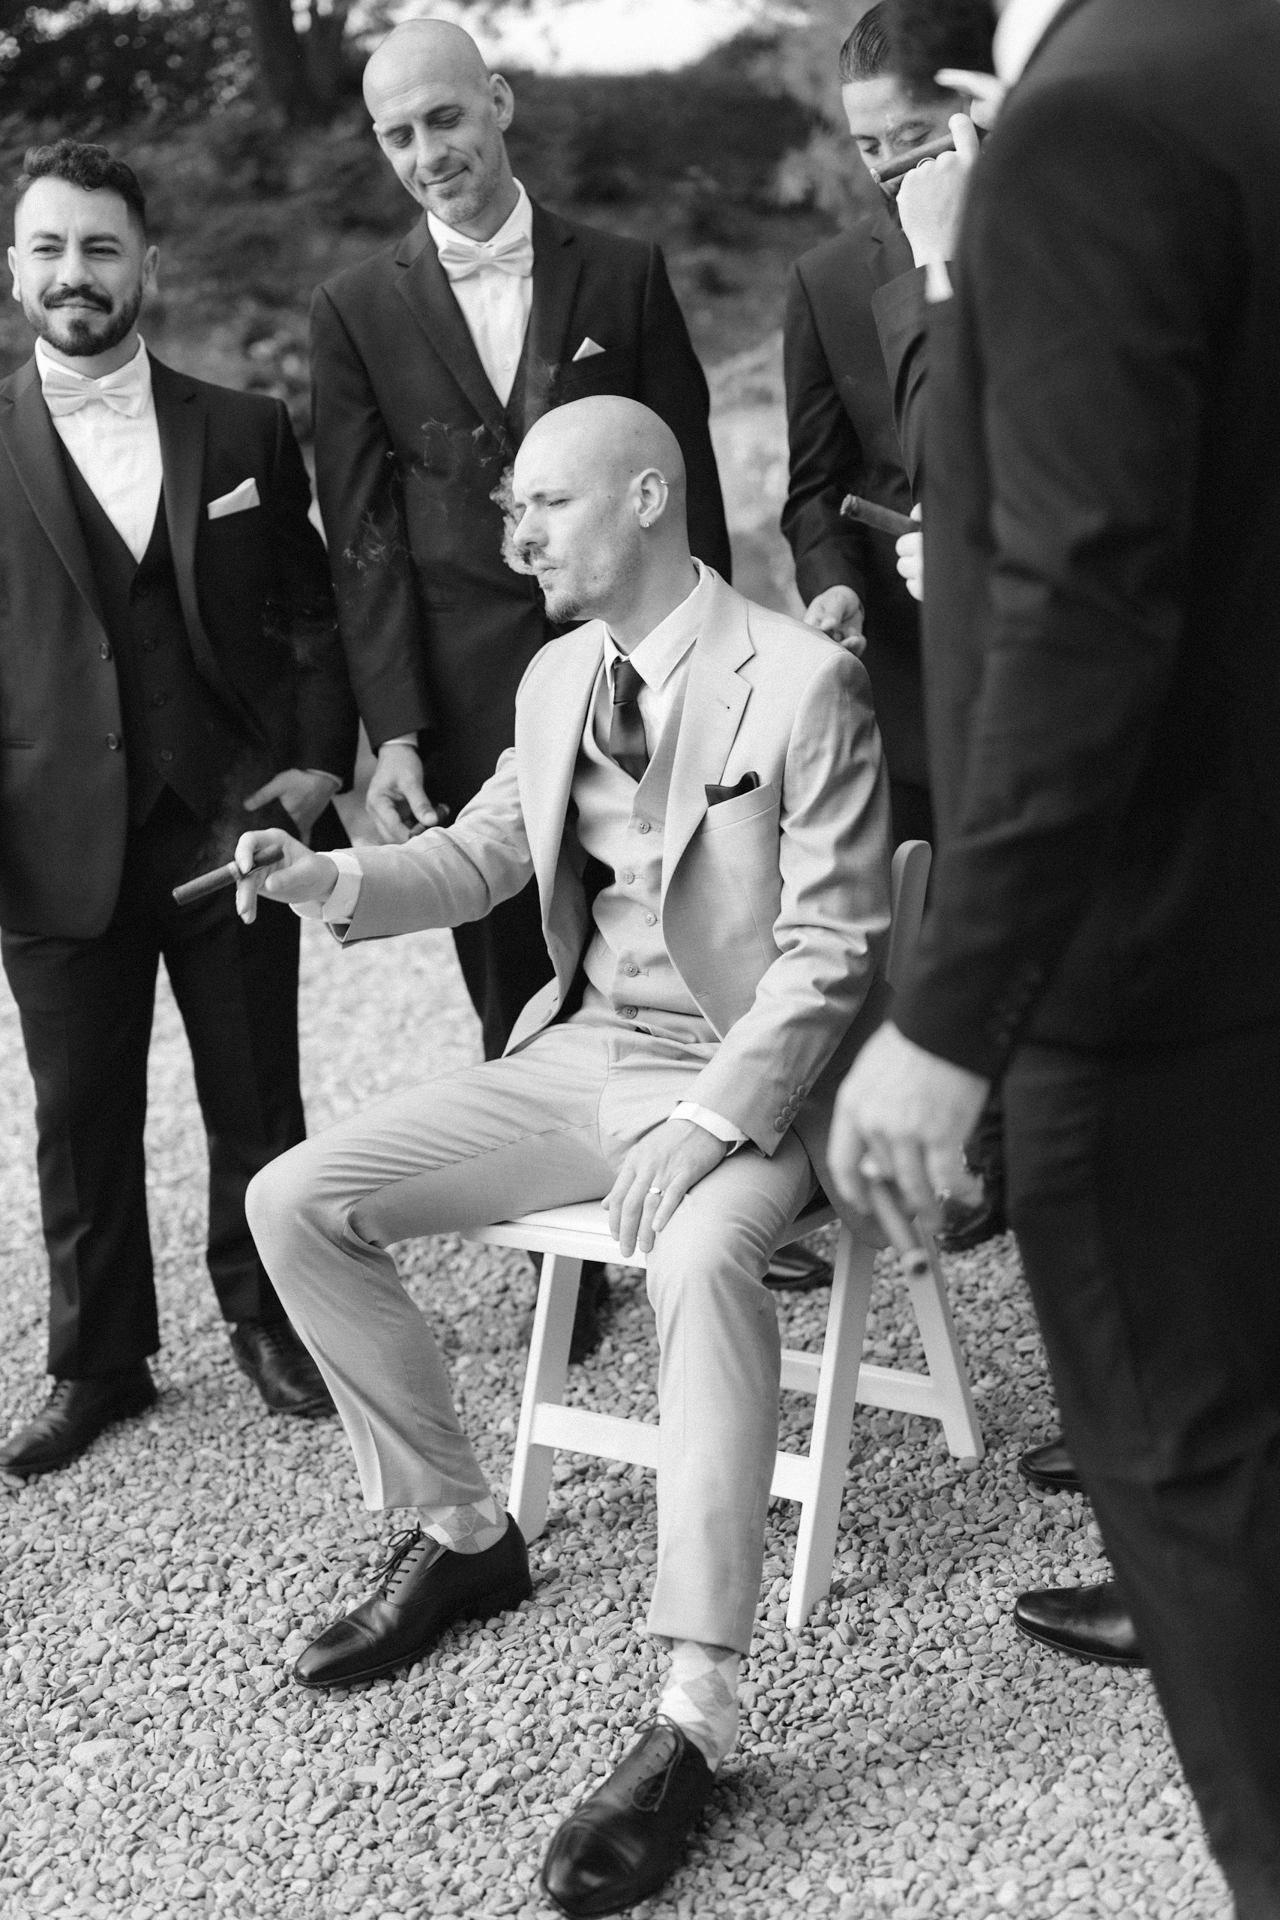 A groom sitting on a chair looking down thoughtfully while holding a cigar, surrounded by a group of formally dressed men.